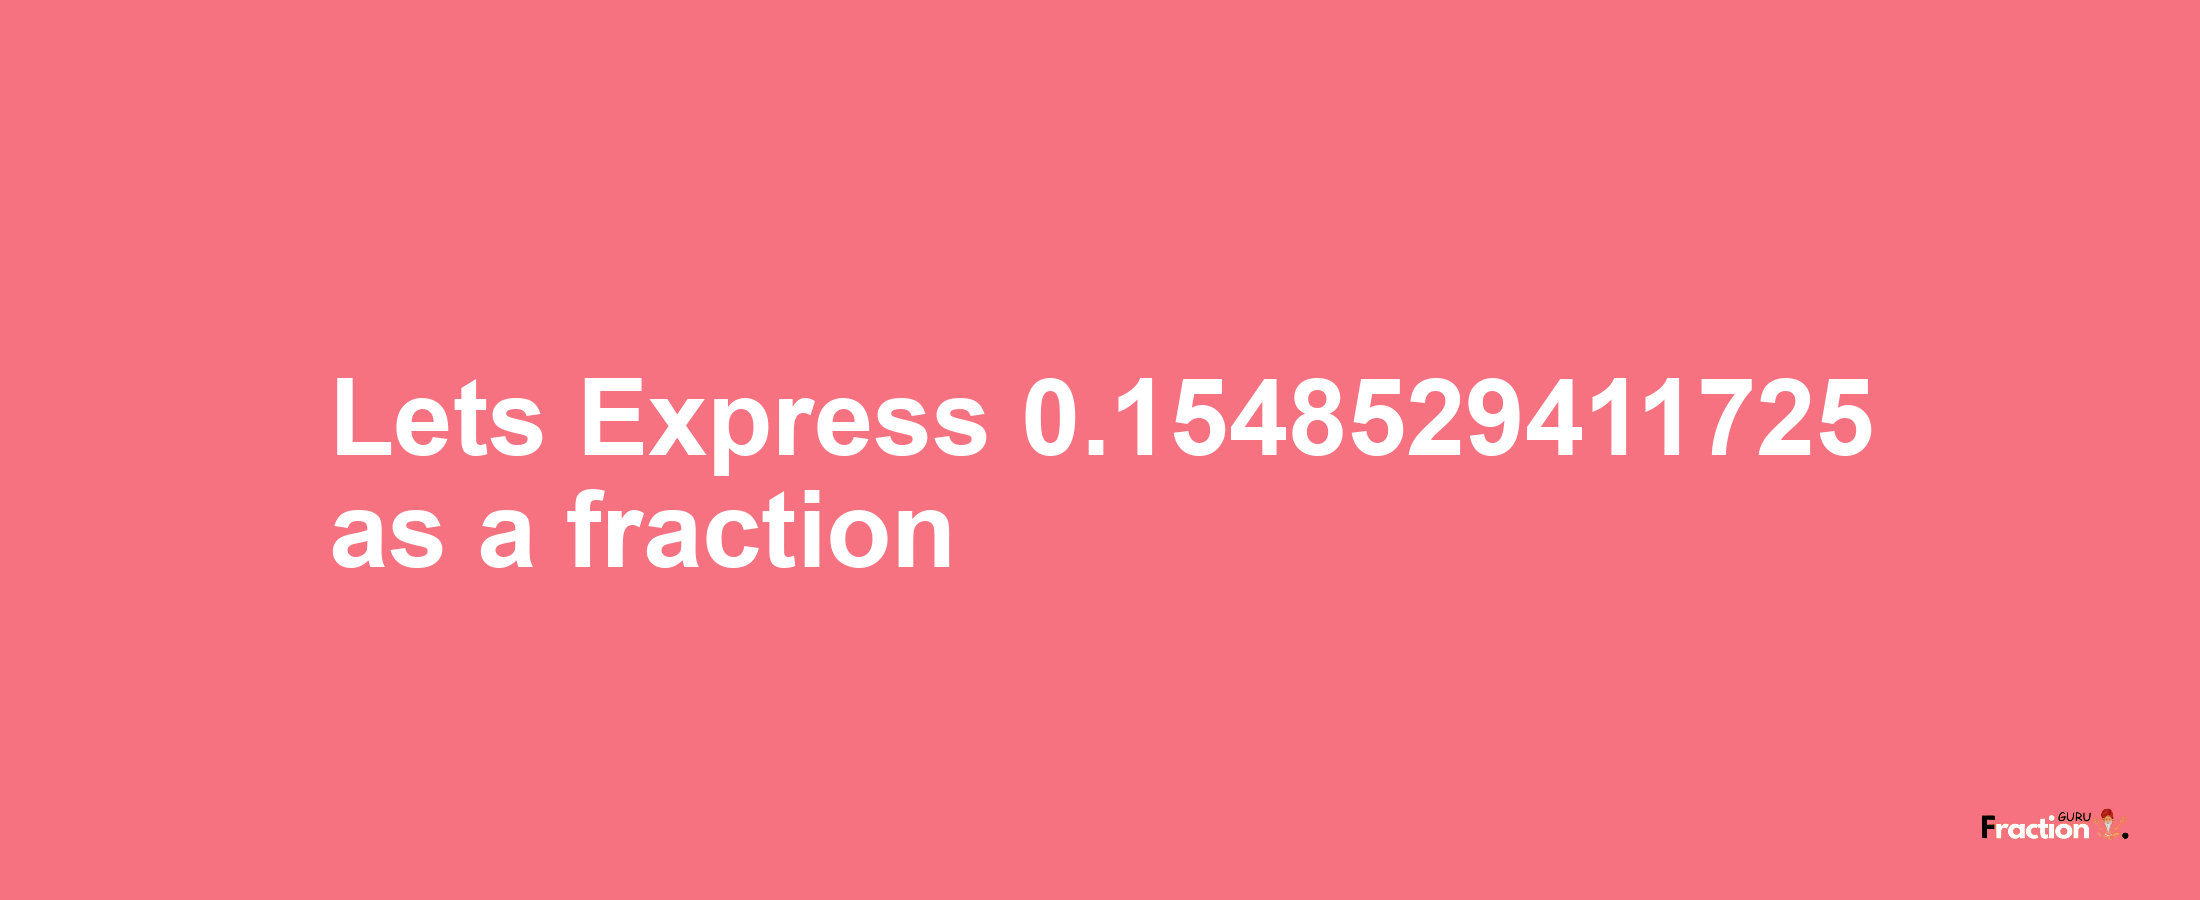 Lets Express 0.1548529411725 as afraction